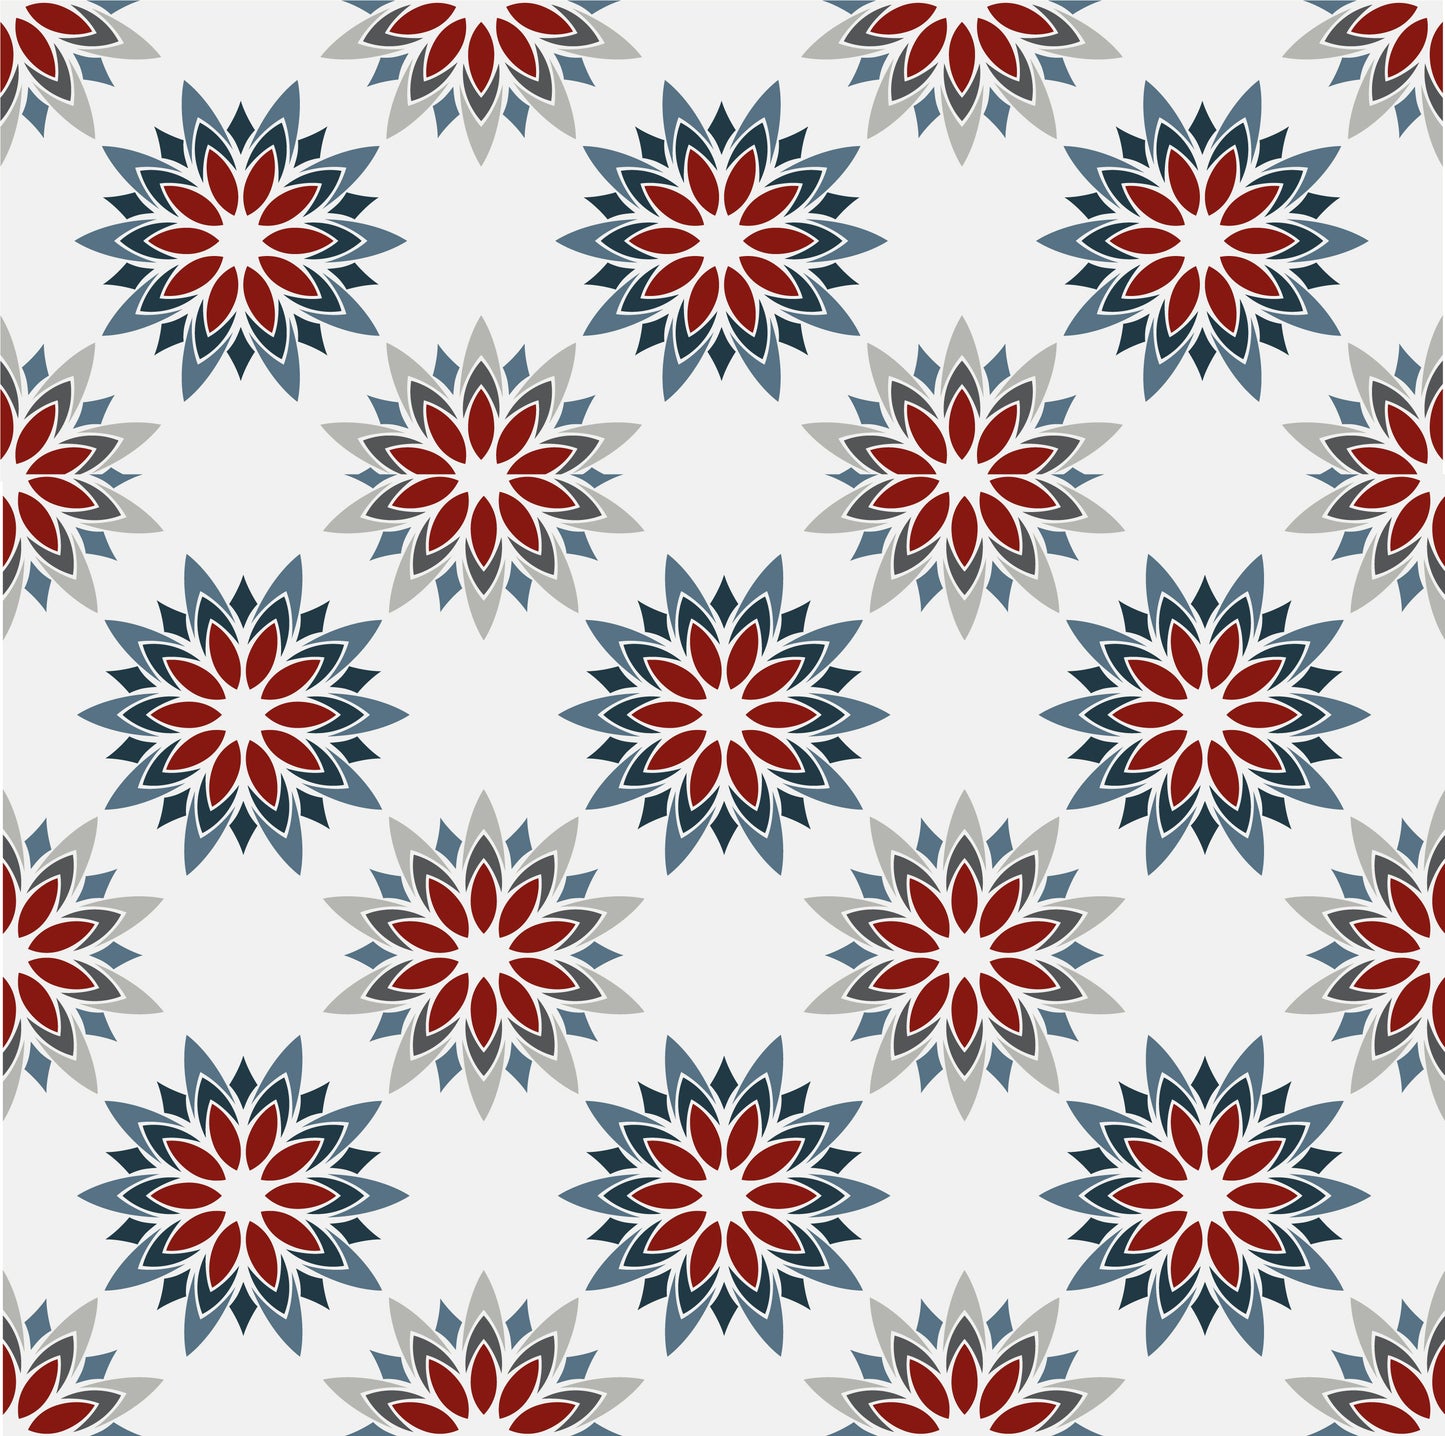 Red, Grey & Blue Floral Tile Stickers